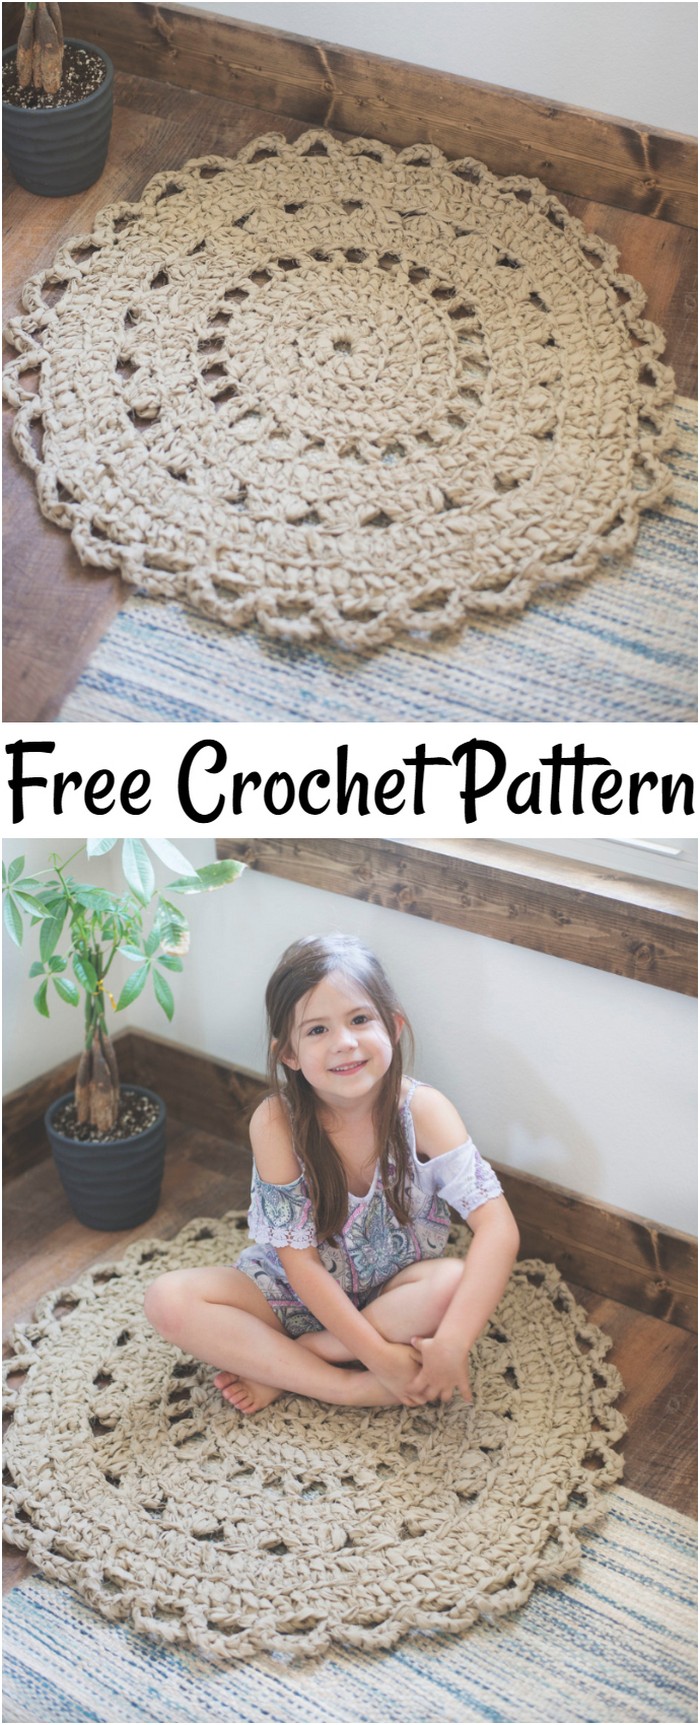 Crochet Pattern For A Doily Rag Rug Made From Bed Sheets